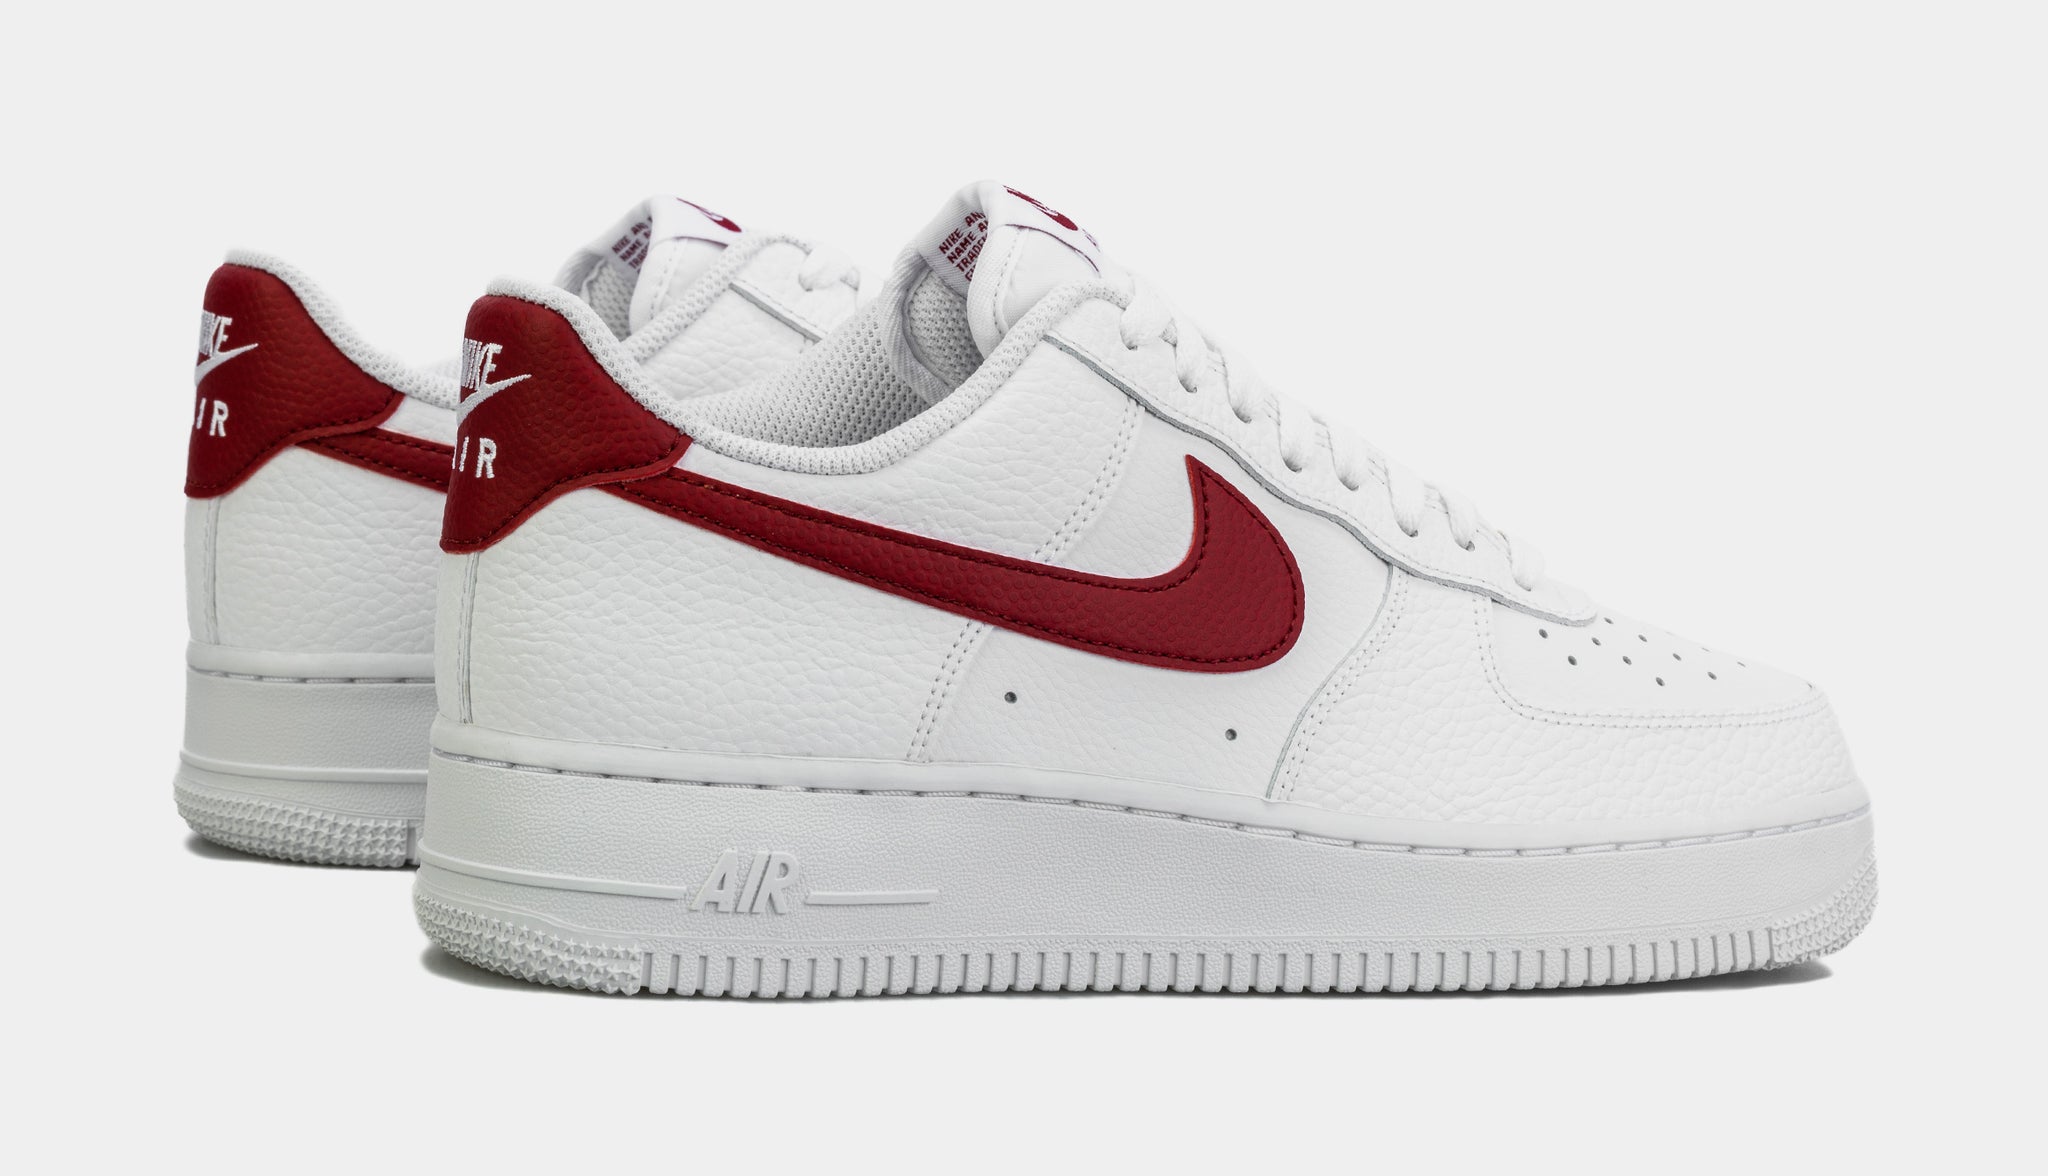 Nike Air Force 1 07 Mens Lifestyle Shoes White CZ0326-100 – Shoe Palace